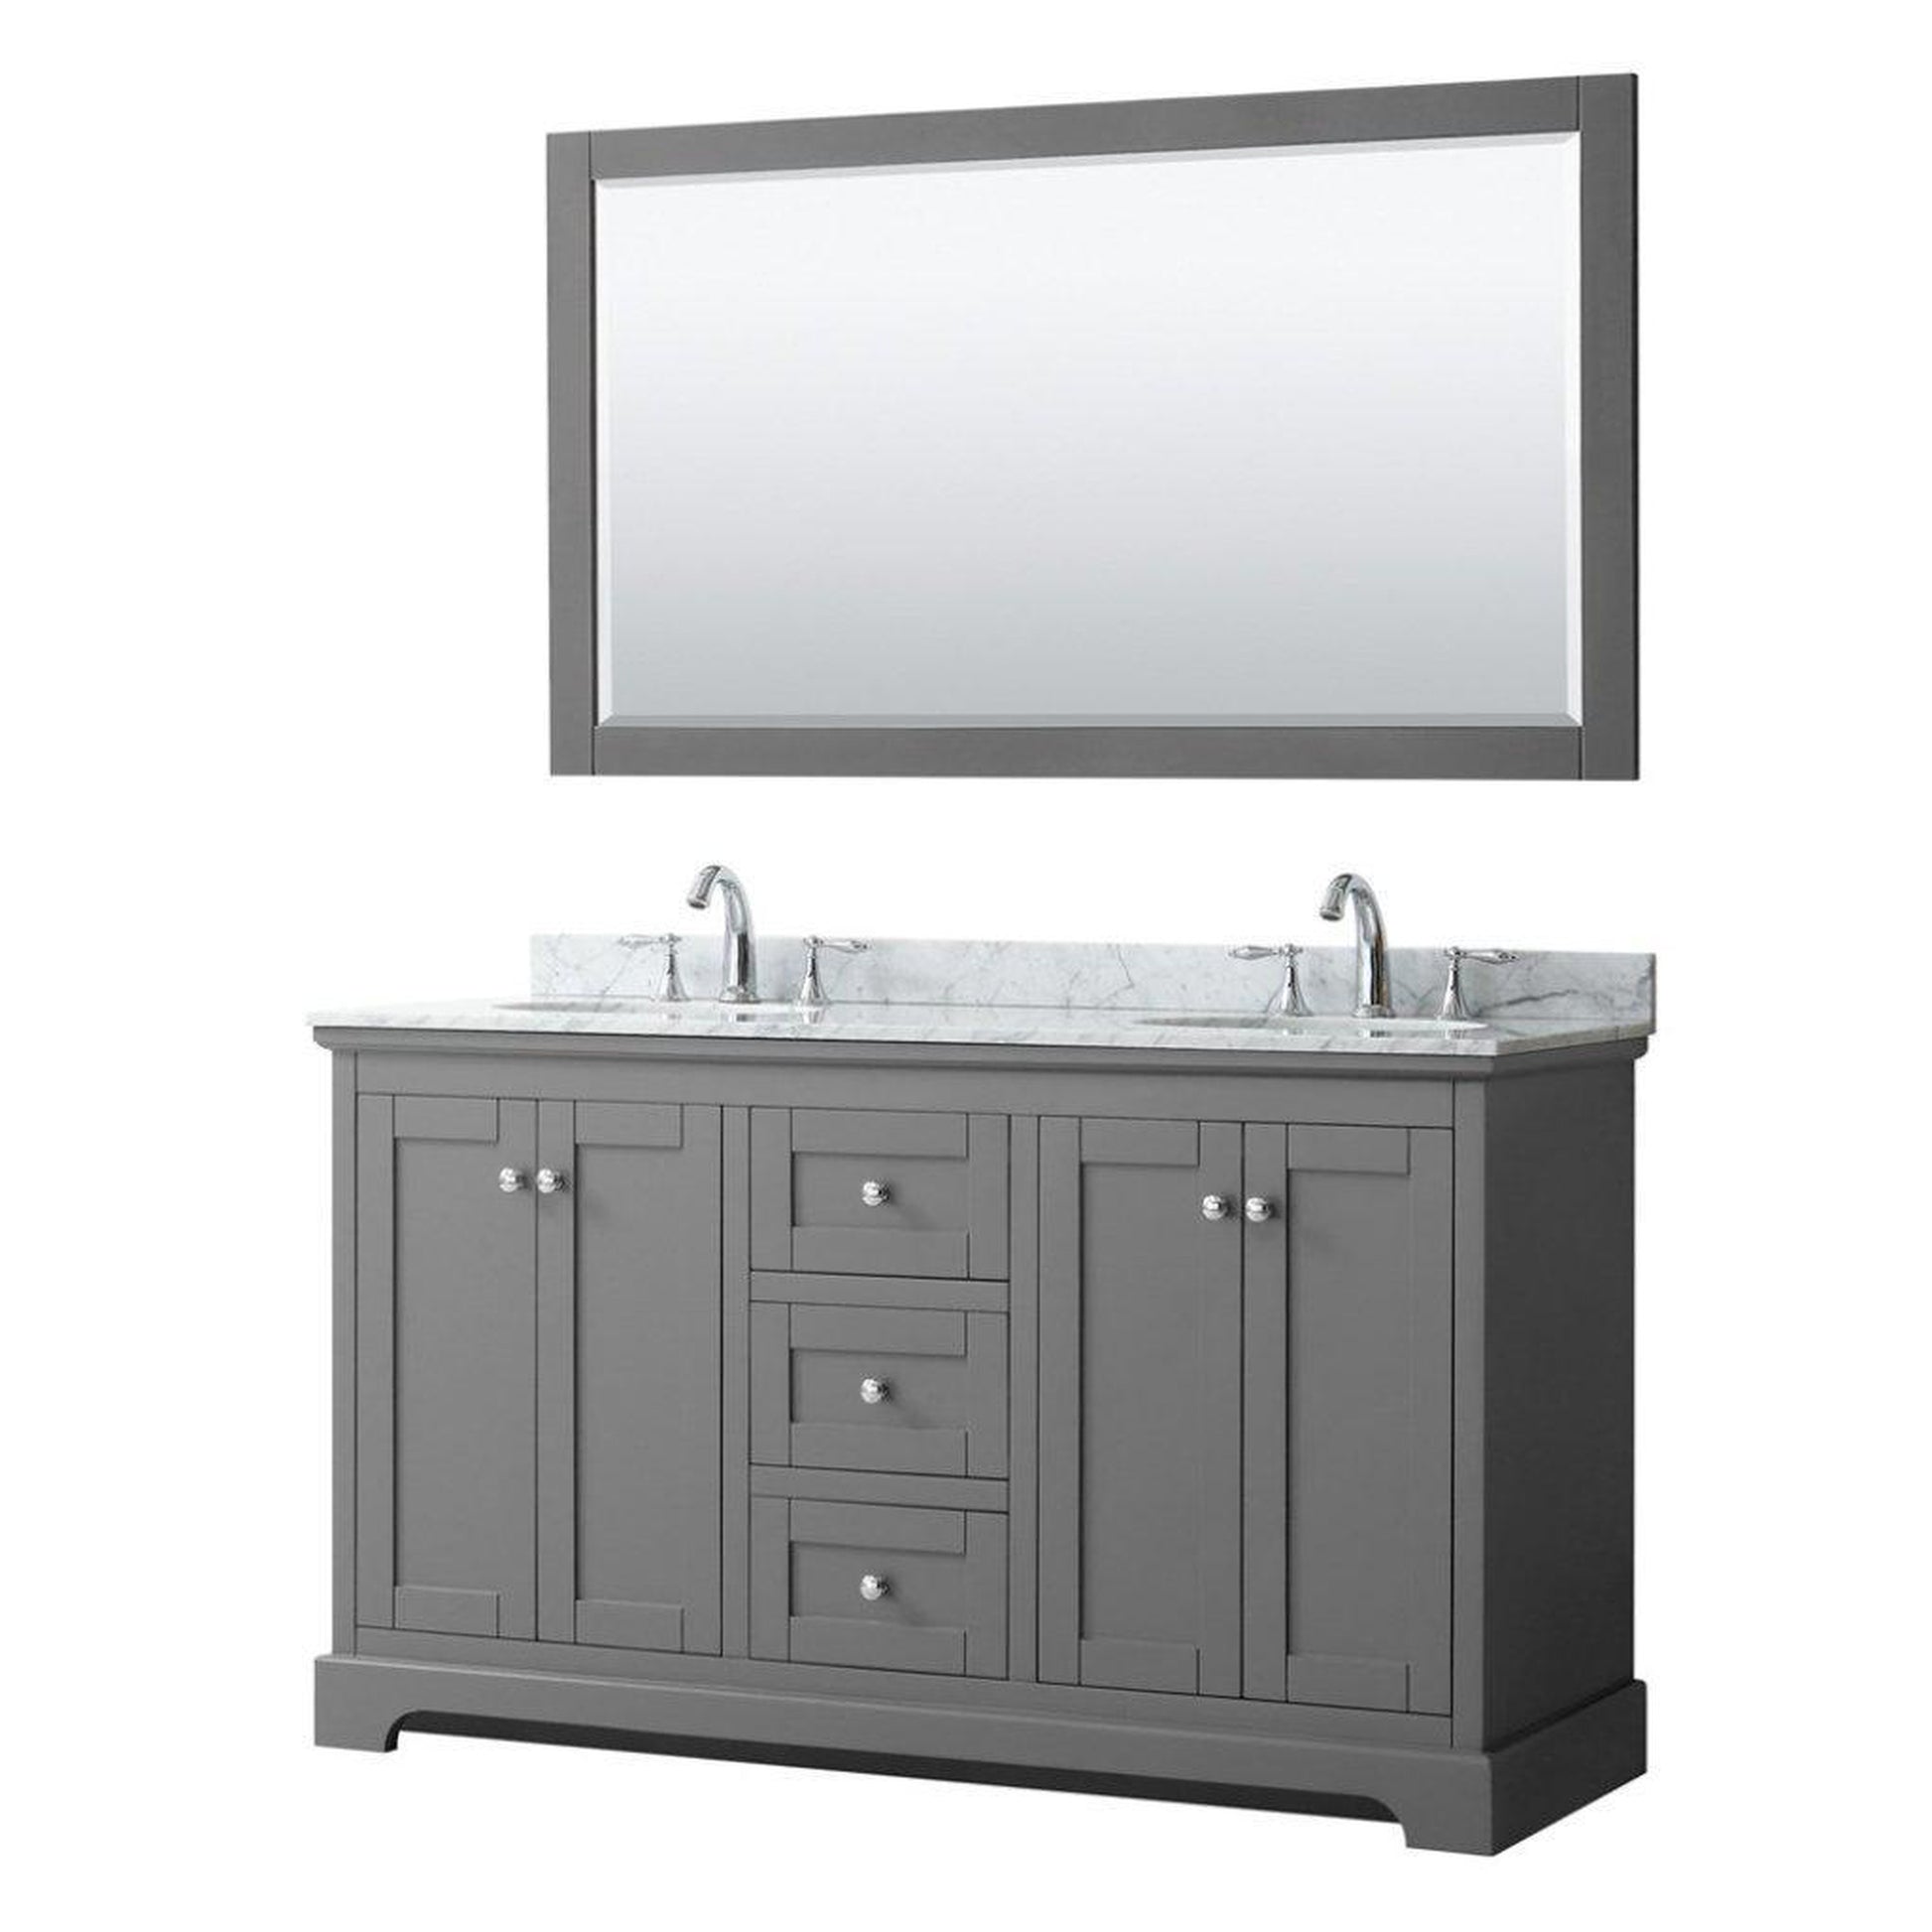 Wyndham Collection Avery 60" Dark Gray Double Bathroom Vanity Set With White Carrara Marble Countertop With 3-Hole Faucet And 8" Oval Sink And 58" Mirror